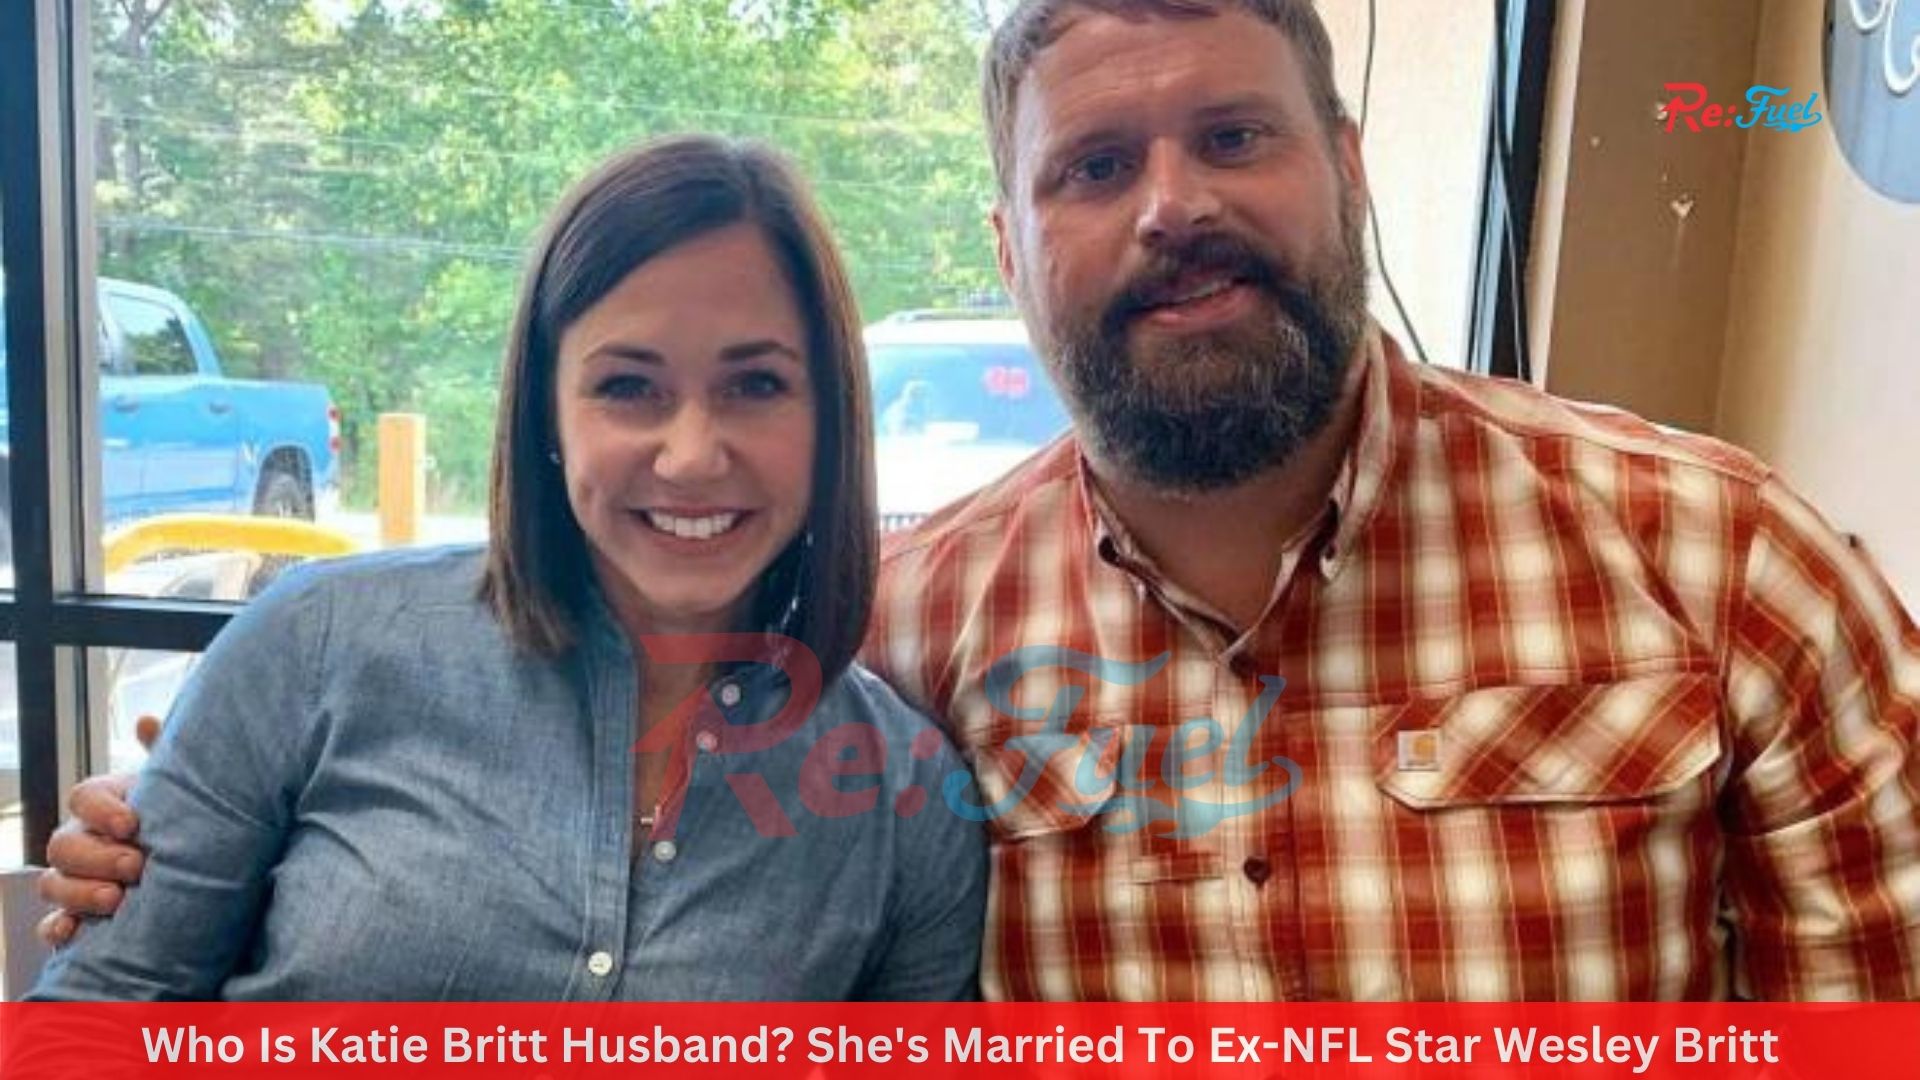 Who Is Katie Britt Husband? She's Married To Ex-NFL Star Wesley Britt